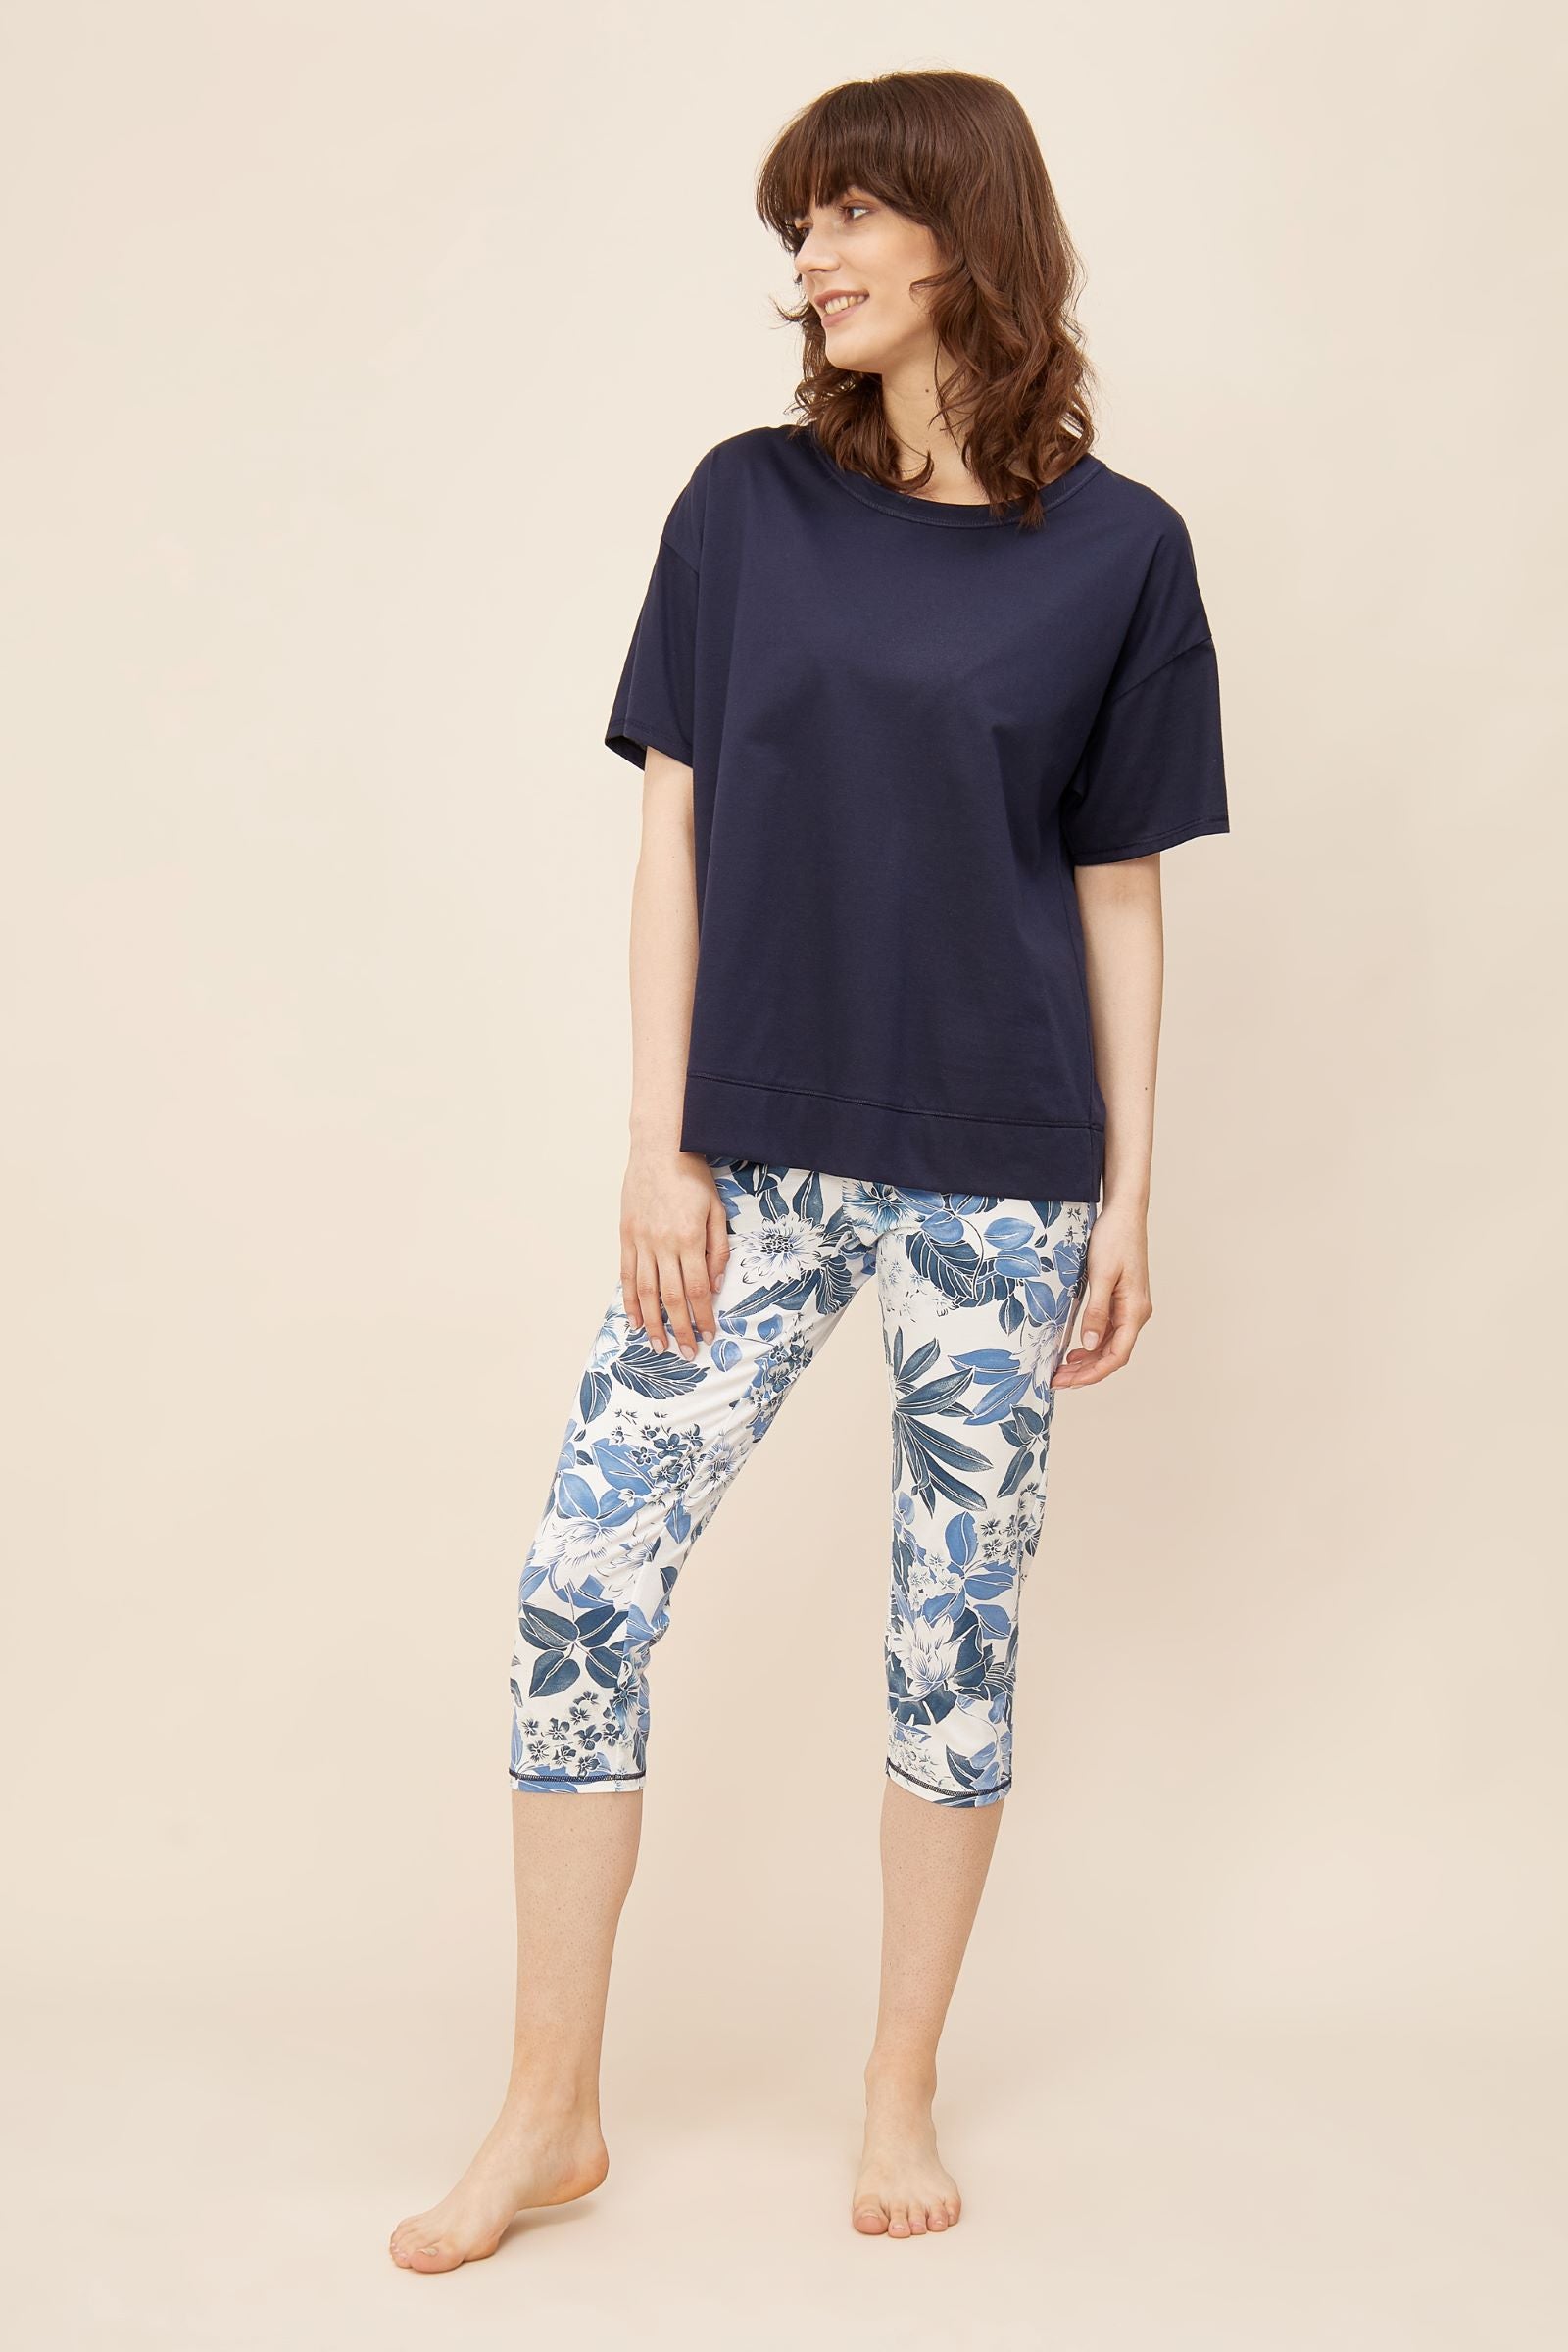 This two-piece pajama set from Rösch's Smart Casual collection is crafted from lightweight, supple single jersey cotton fabric, boasting a solid colored top and capri pants embellished with an indigo floral print.  Short sleeve  Wide crew-neck